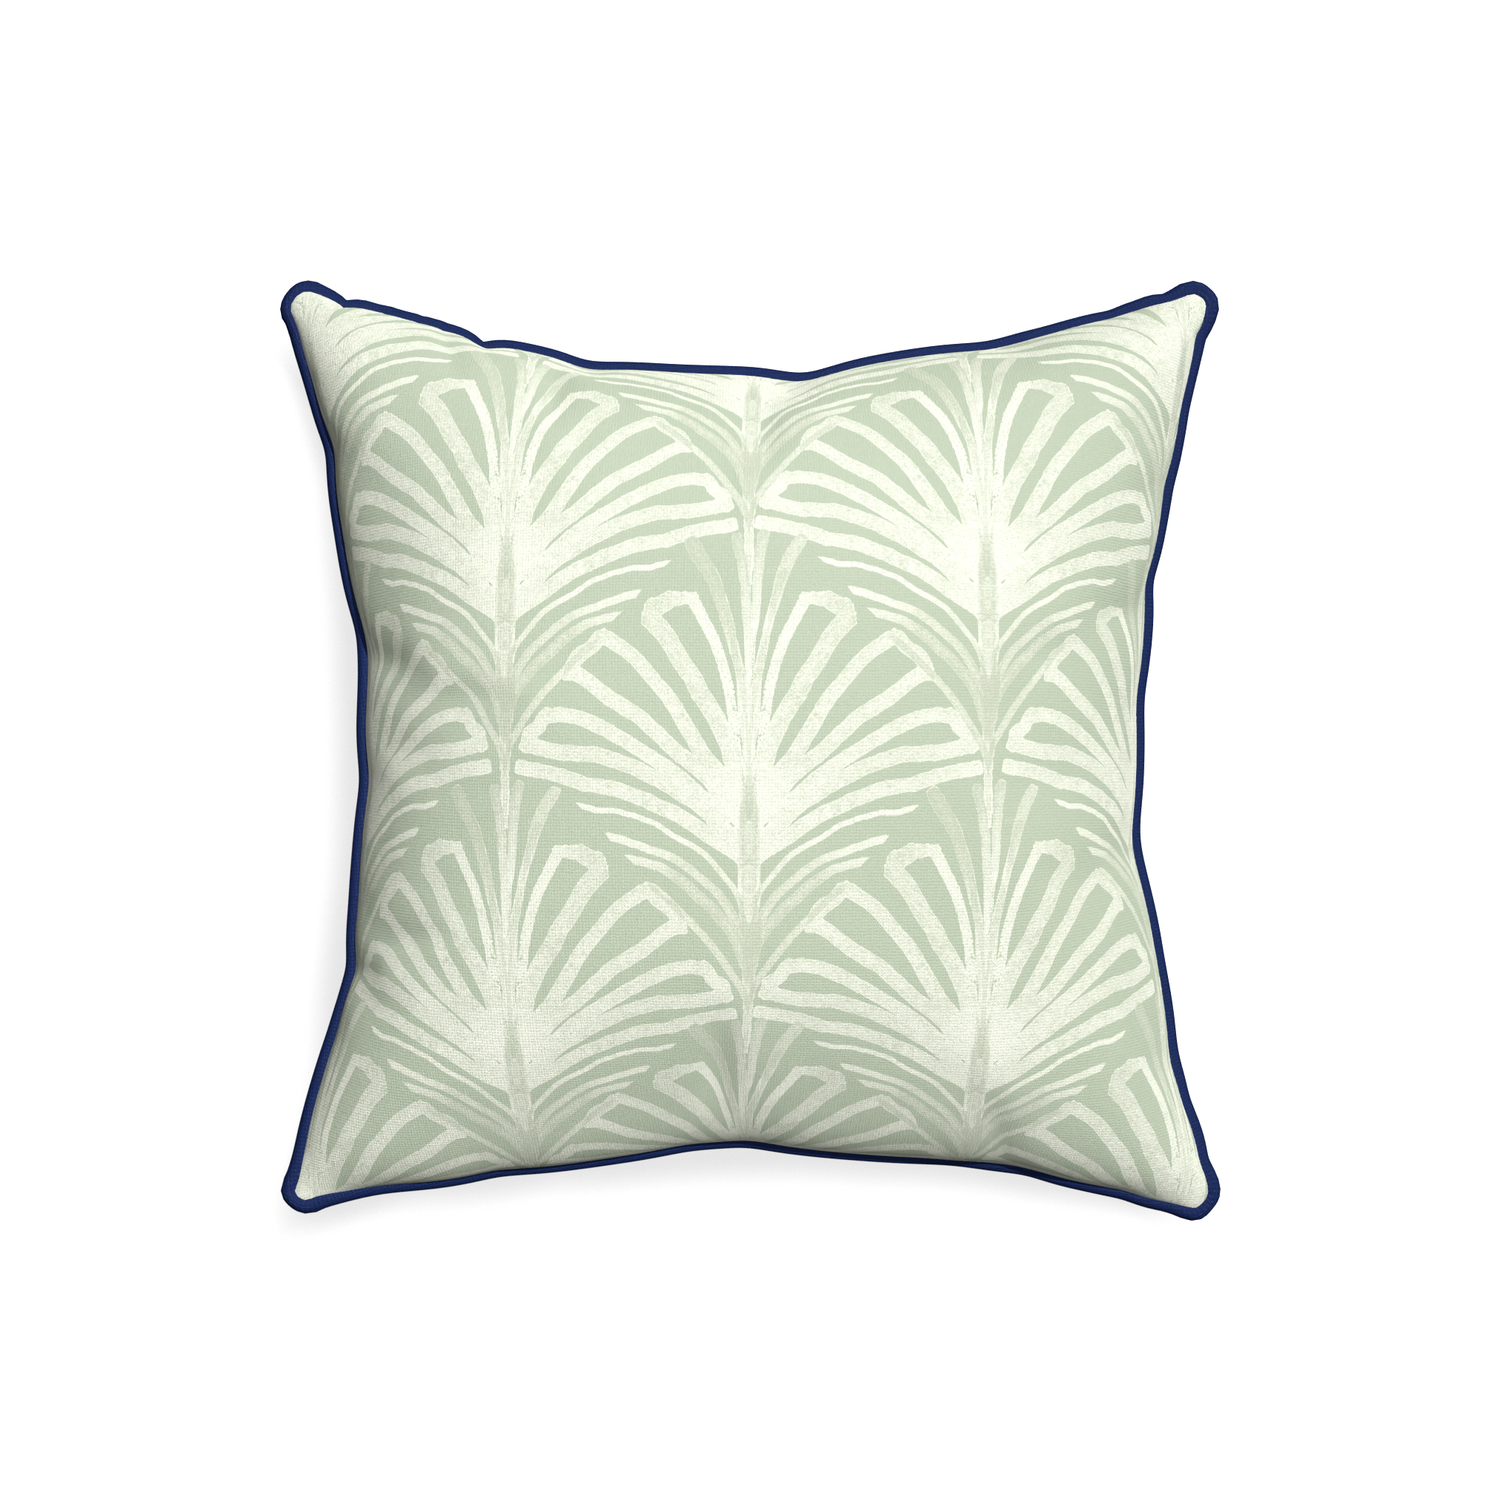 20-square suzy sage custom sage green palmpillow with midnight piping on white background